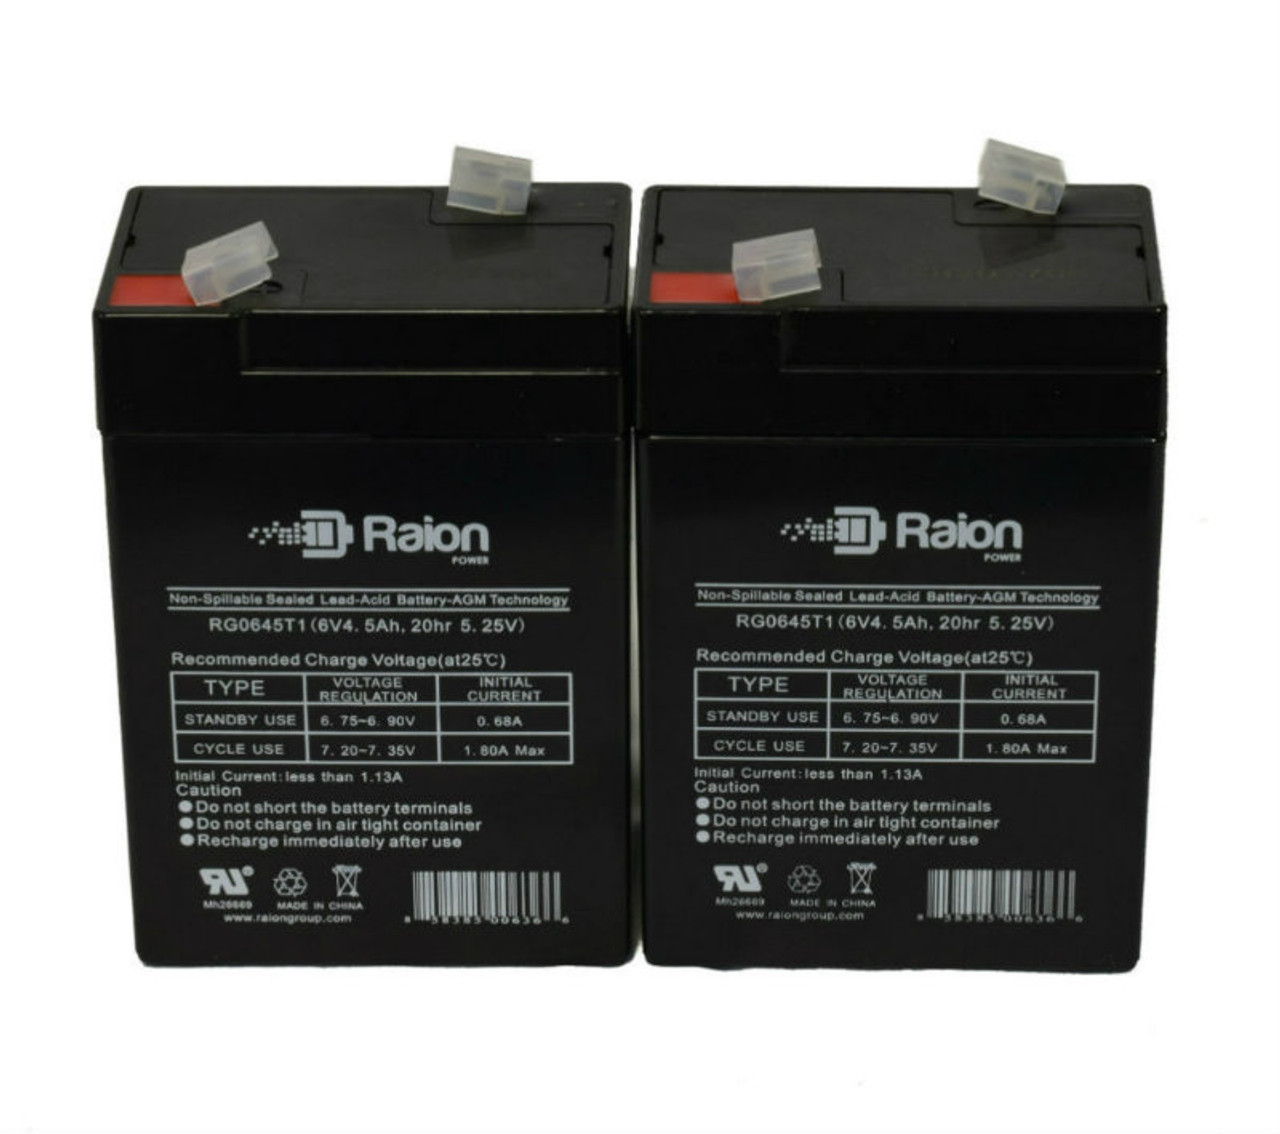 Raion Power 6V 4.5Ah Replacement Emergency Light Battery for Siltron SN640 - 2 Pack